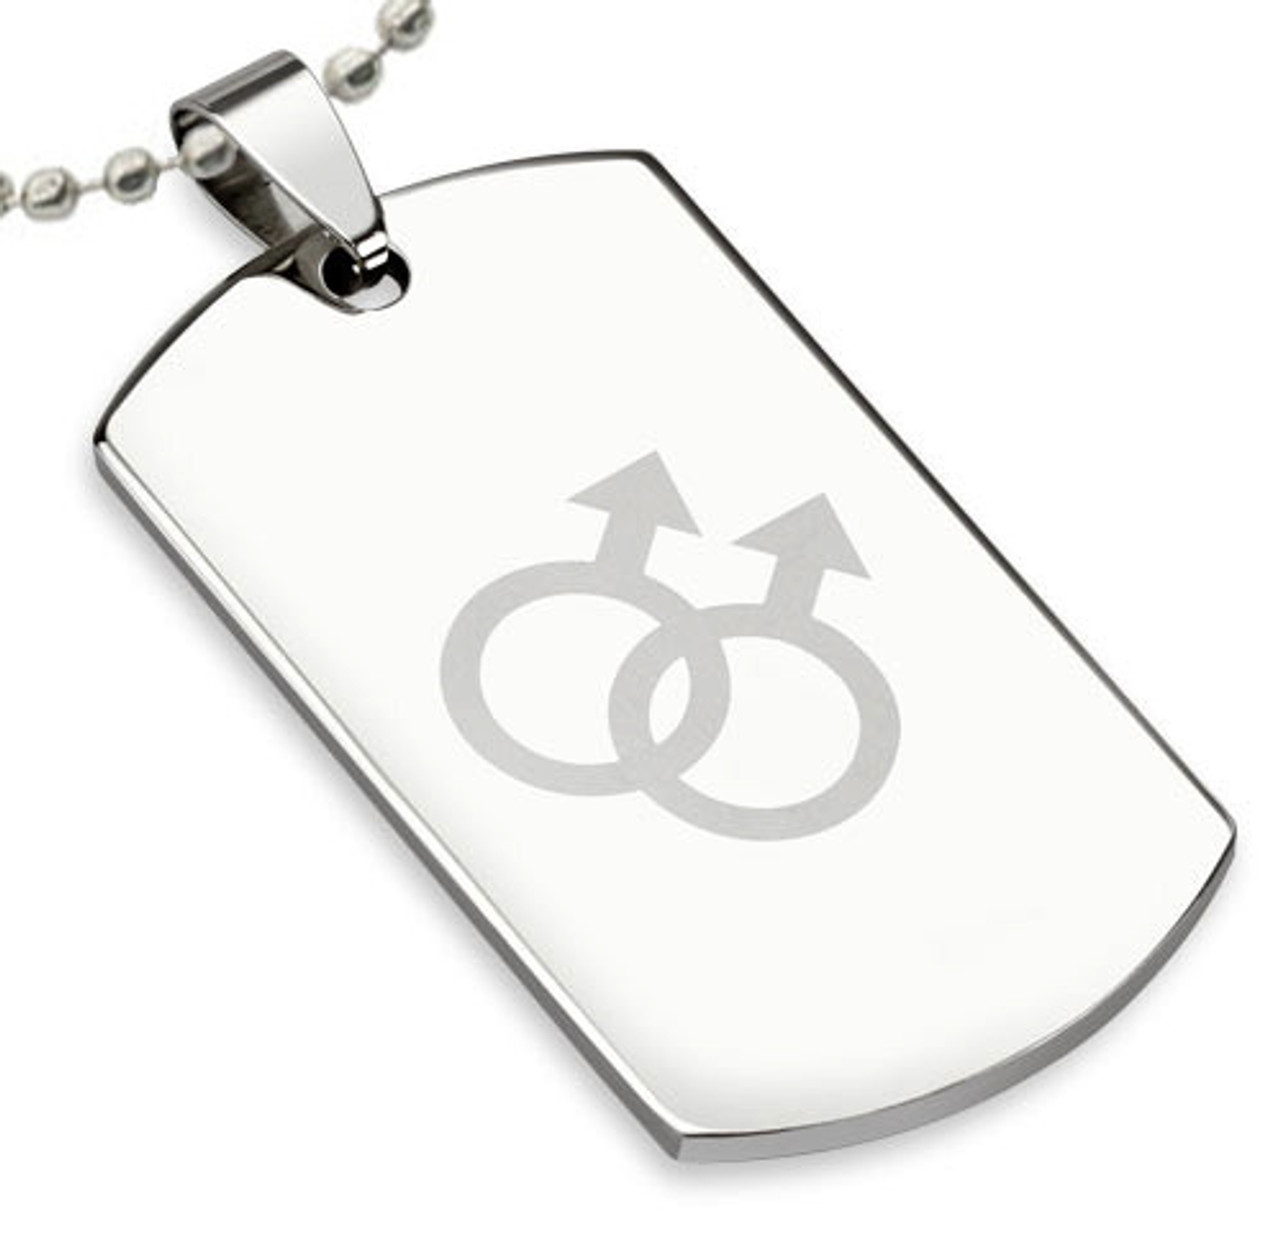 Double Male Laser Etched Stainless Steel Dog Tag Pendant - Gay Pride Necklace  pride pendants, gay pride jewelry, gay pride pendants, gay mens jewelry, pride pendant,
